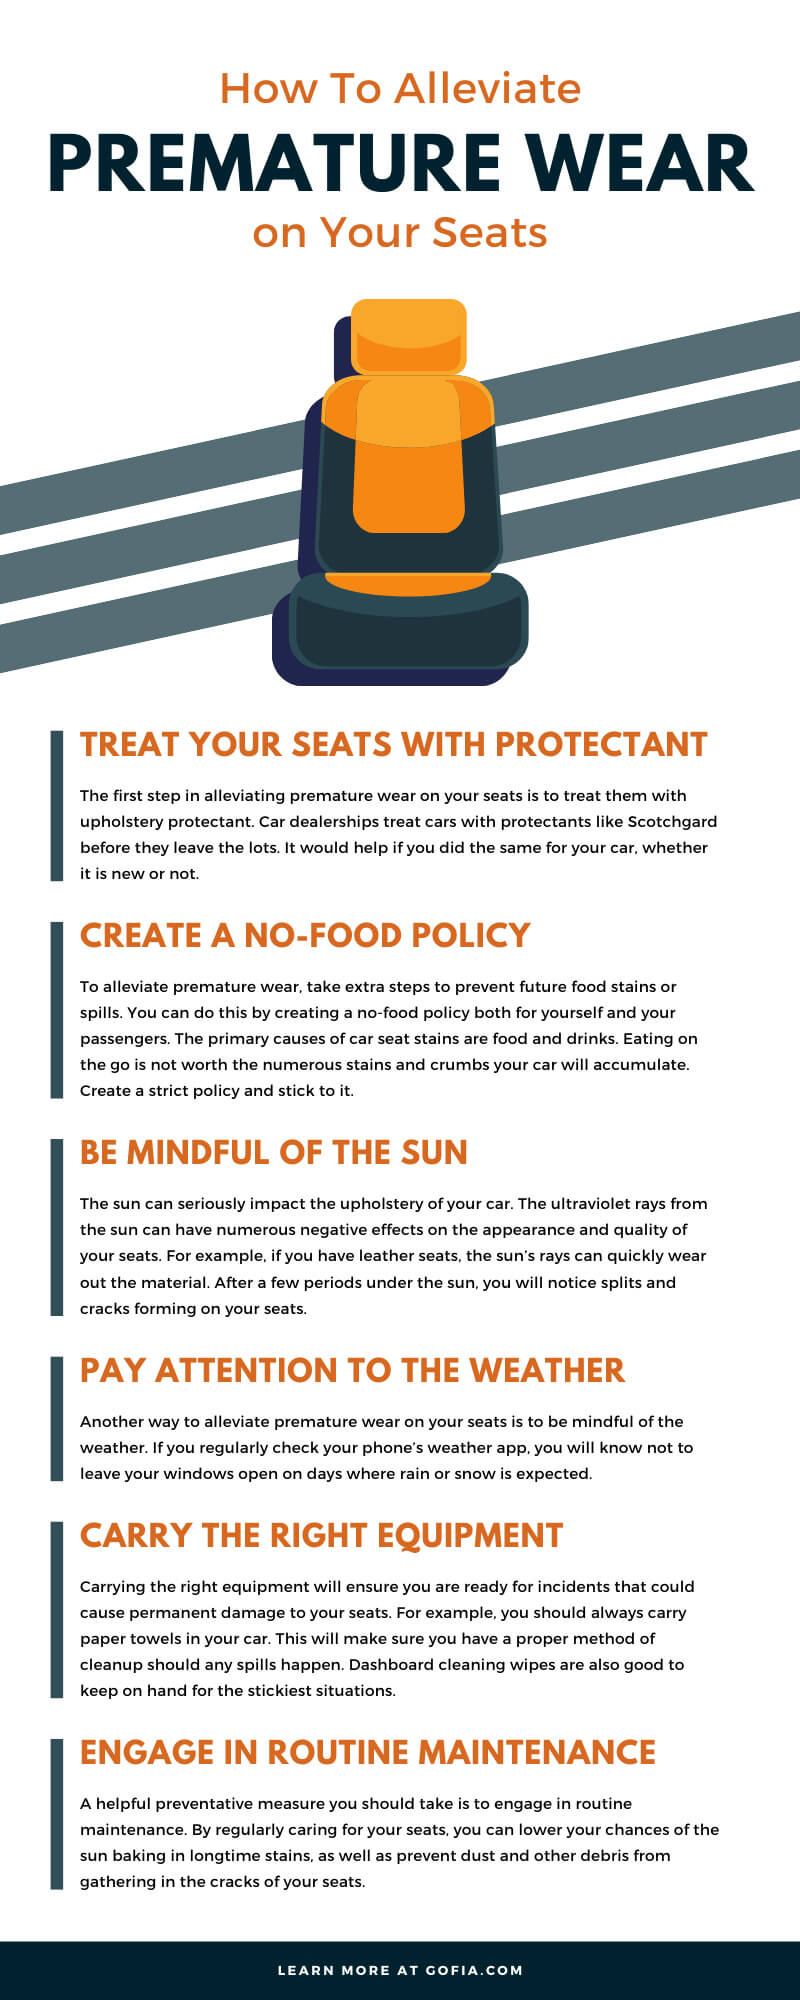 How To Alleviate Premature Wear on Your Seats